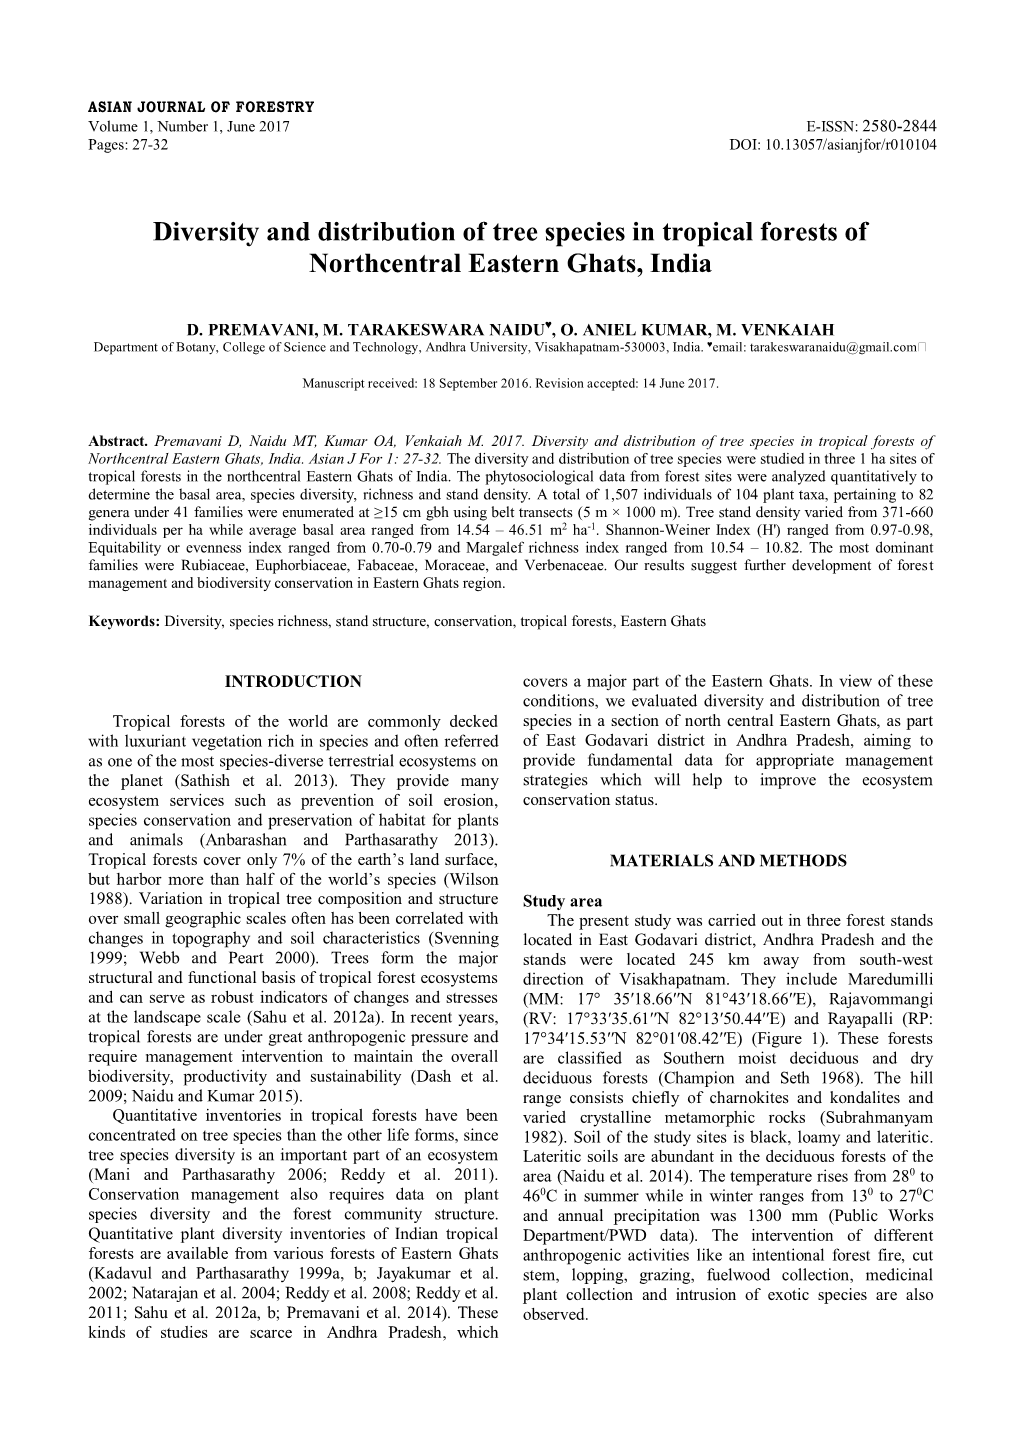 Diversity and Distribution of Tree Species in Tropical Forests of Northcentral Eastern Ghats, India